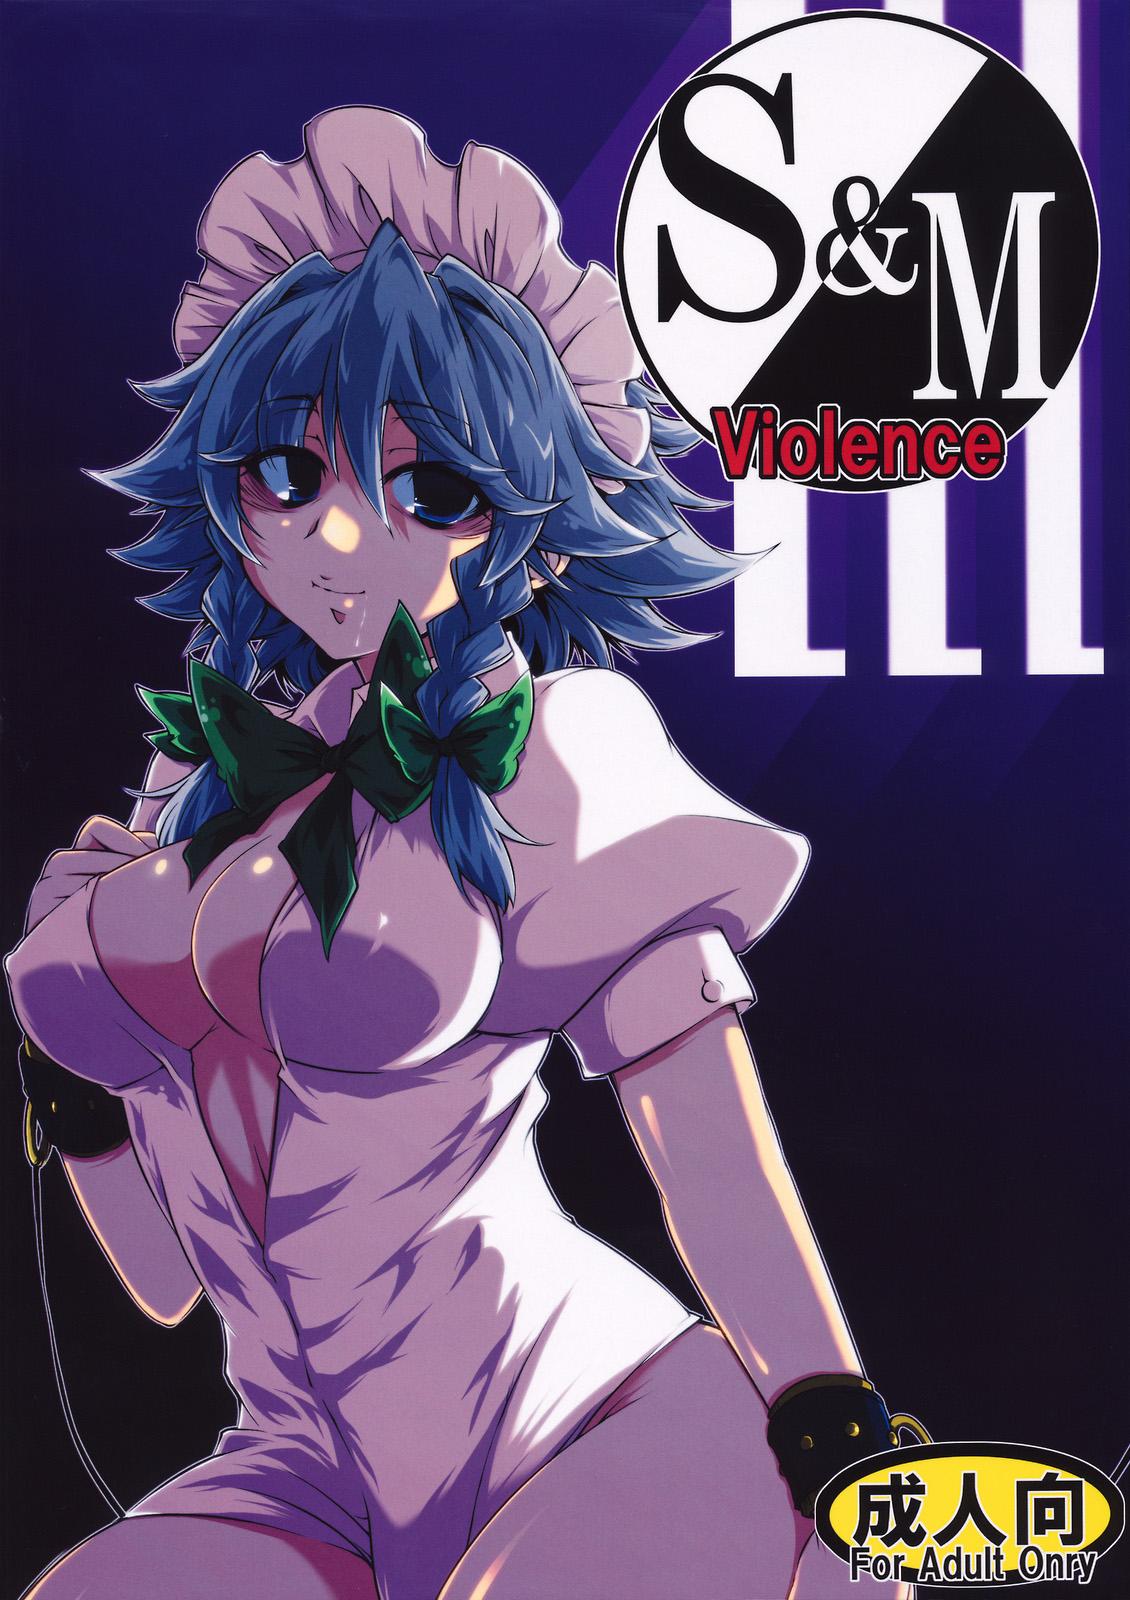 Ametur Porn S&M Violence - Touhou project Small Tits Porn - Page 1